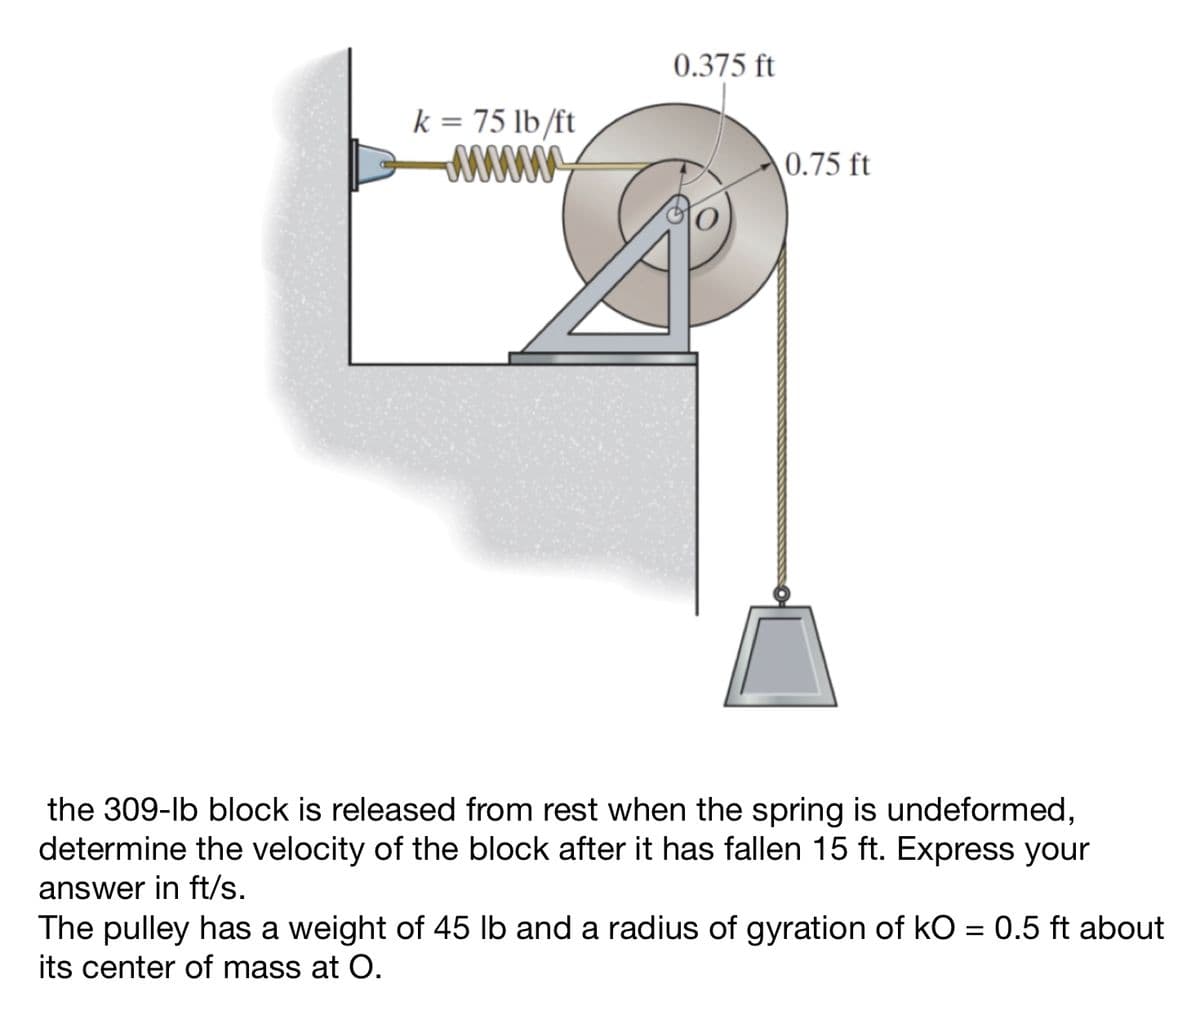 k = 75 lb/ft
www
0.375 ft
0.75 ft
the 309-lb block is released from rest when the spring is undeformed,
determine the velocity of the block after it has fallen 15 ft. Express your
answer in ft/s.
The pulley has a weight of 45 lb and a radius of gyration of kO = 0.5 ft about
its center of mass at O.